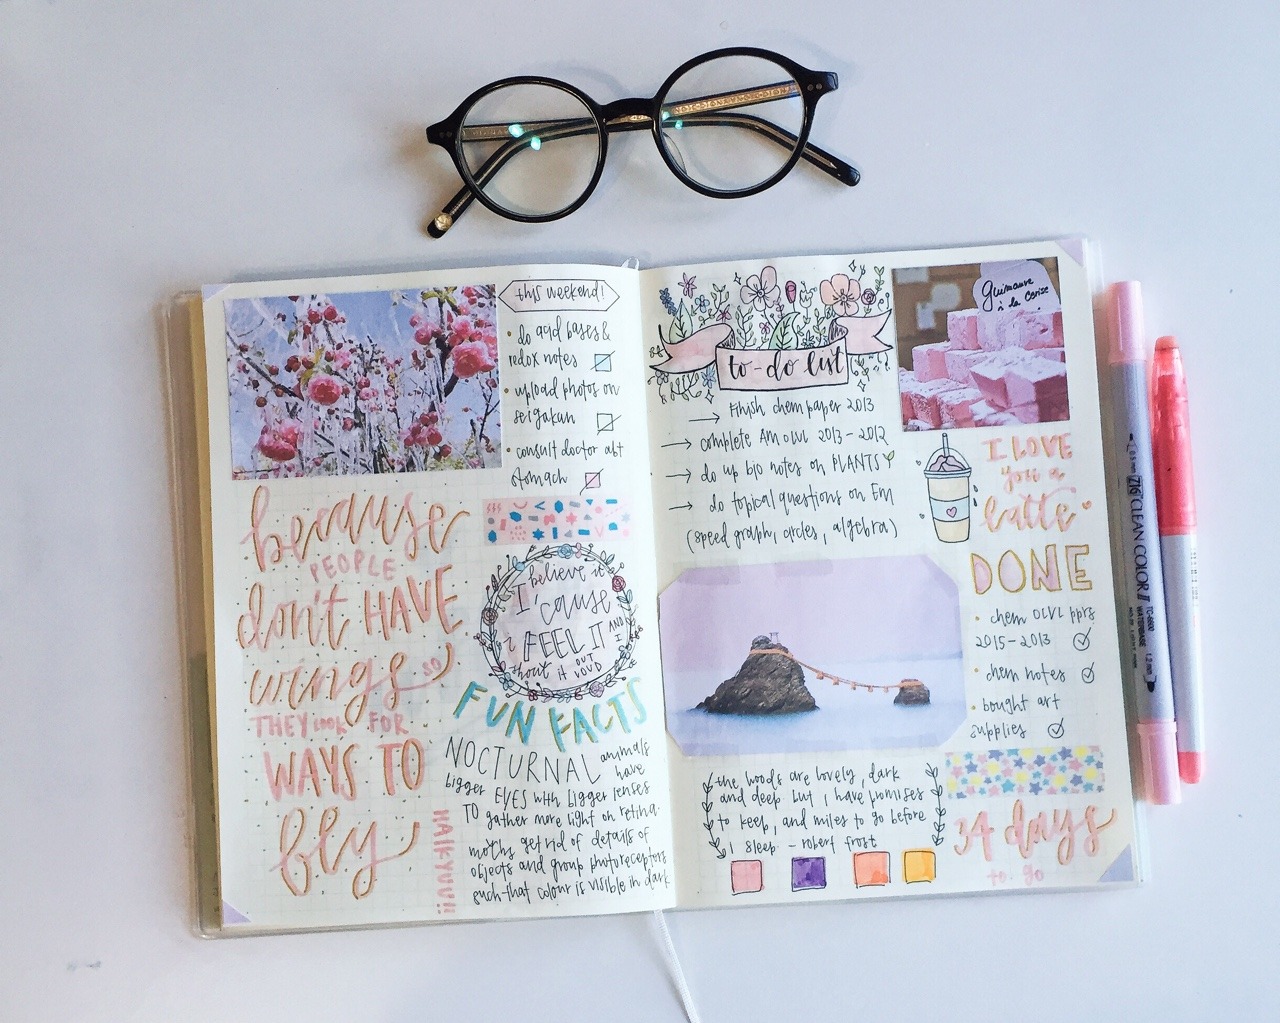 Image about inspiration in + studyblr by ˗ˏˋ ıєѧ ṃ ˎˊ˗